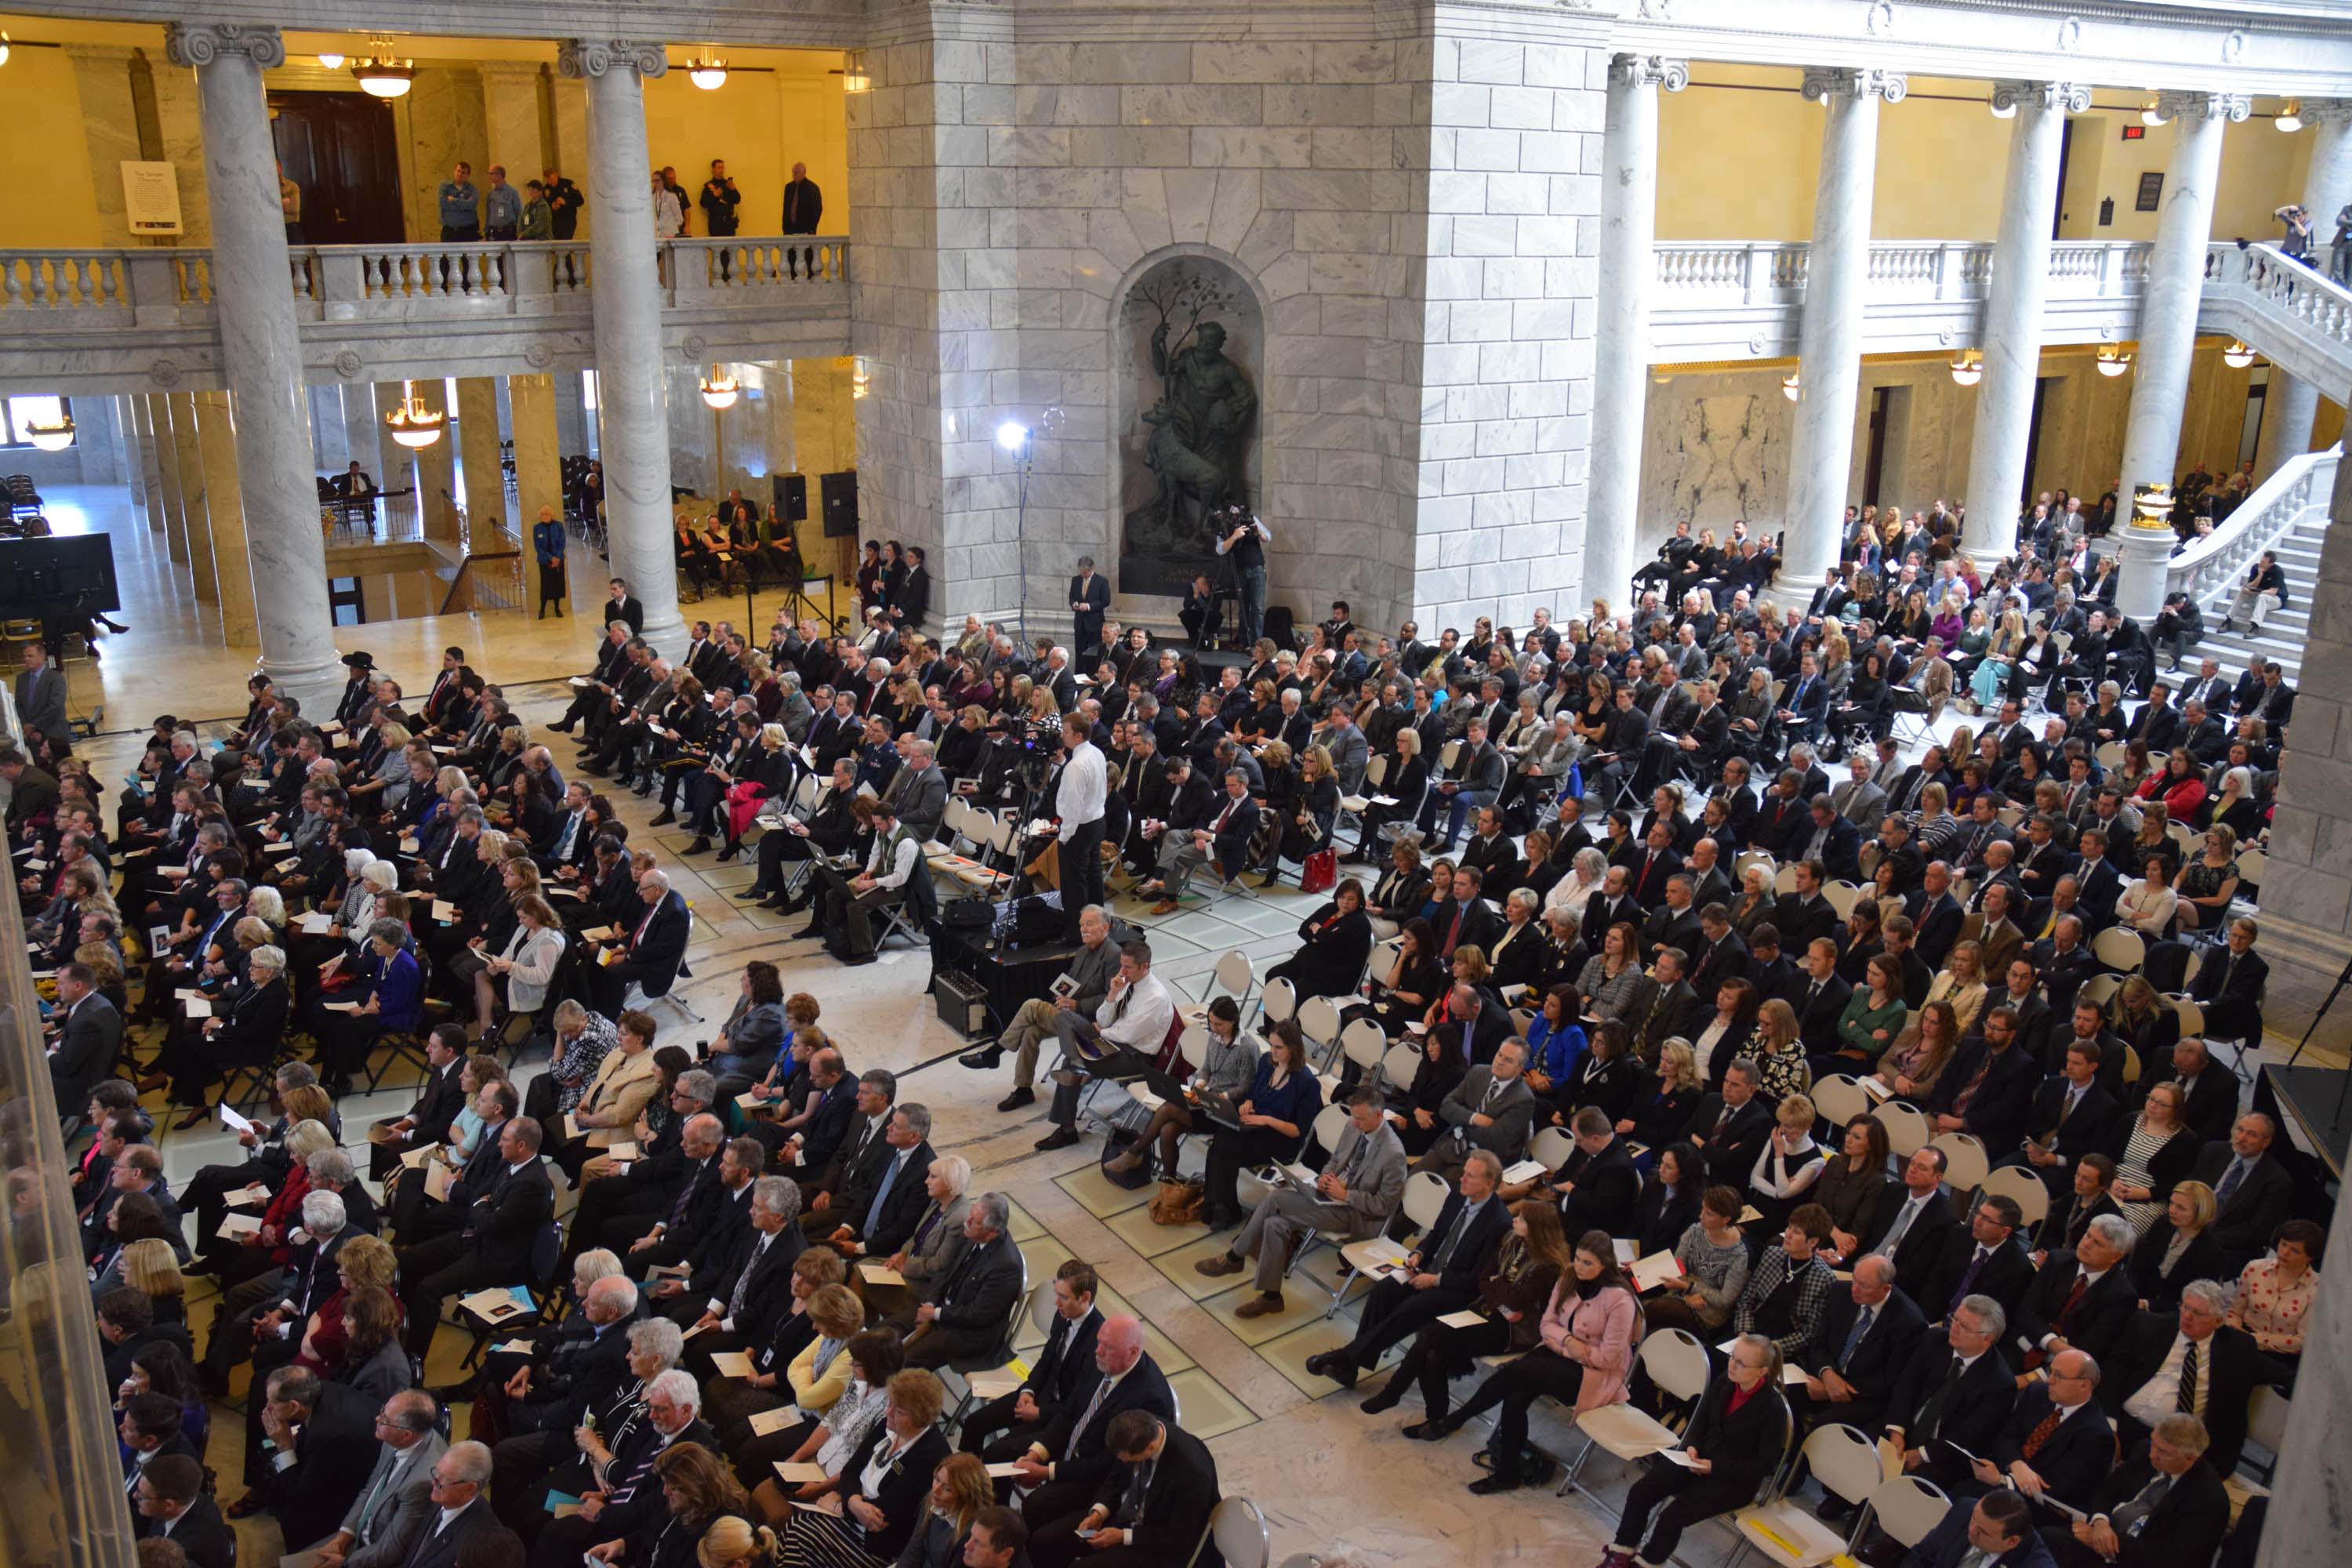 About 1,500 people attended the memorial service for former Utah House Speaker Becky Lockhart.